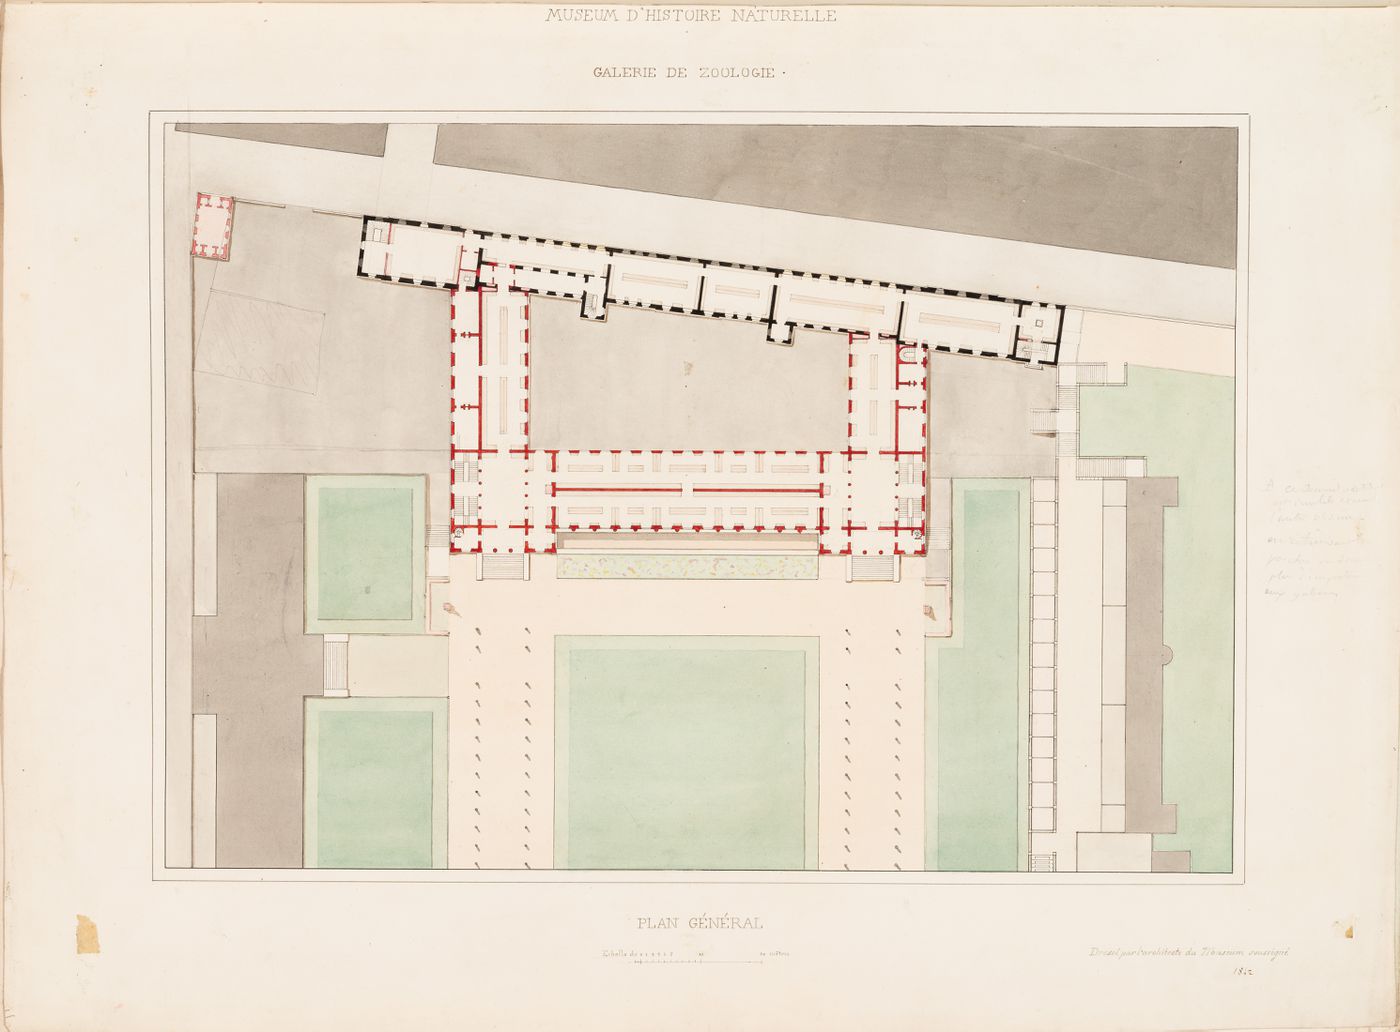 Project for a Galerie de zoologie, 1842: Site plan, showing the ground floor